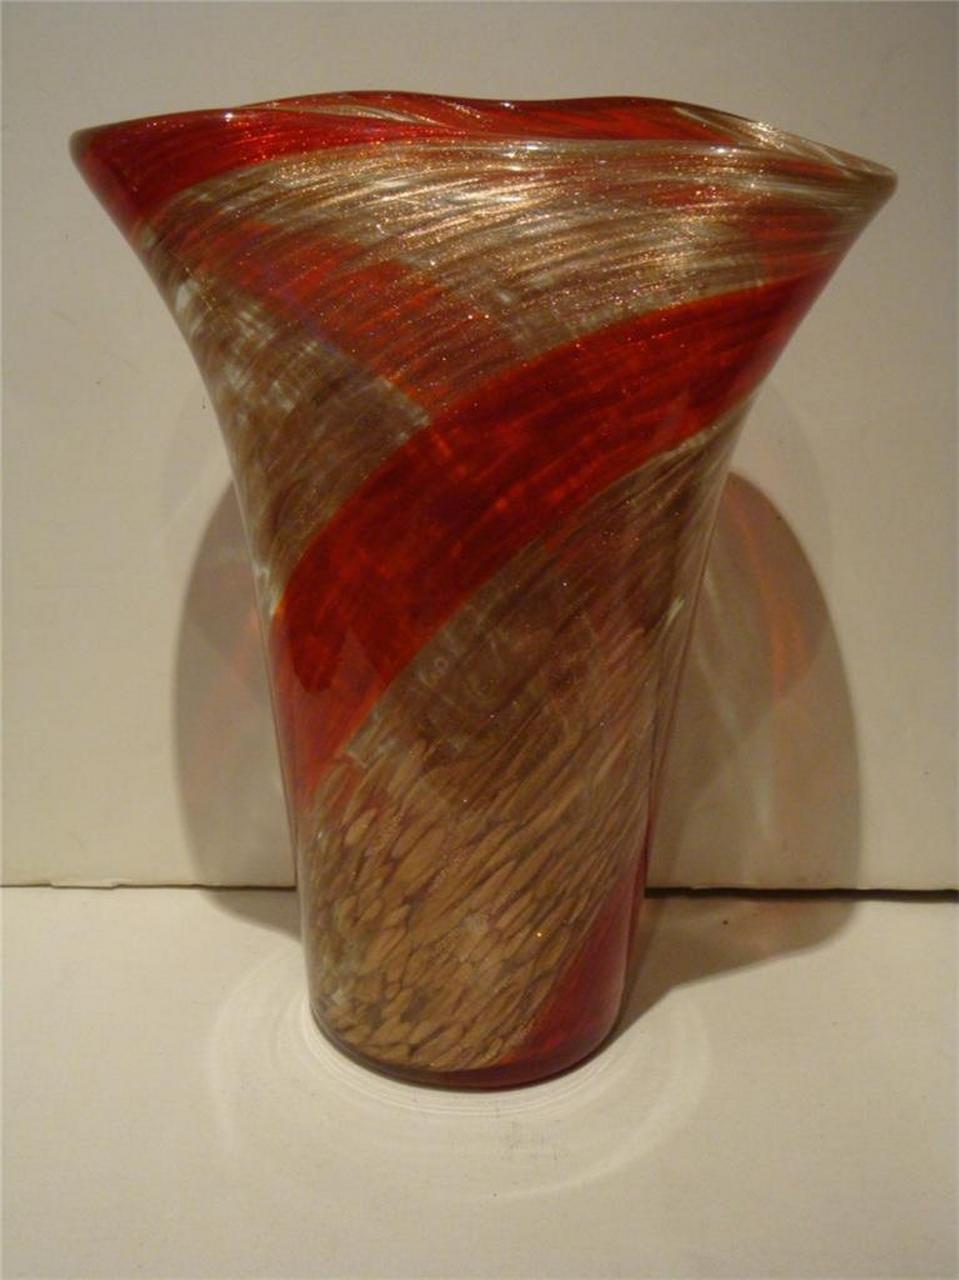 The Following Item we are offering is this Rare Important Estate Aureliano Toso Dino Martens Spiraling Vase. The Beautiful Vase in Clear Glass Internally Decorated with Random Splashes of Gold Colored Aventurine overlaid with a Broad Spiral of a Red